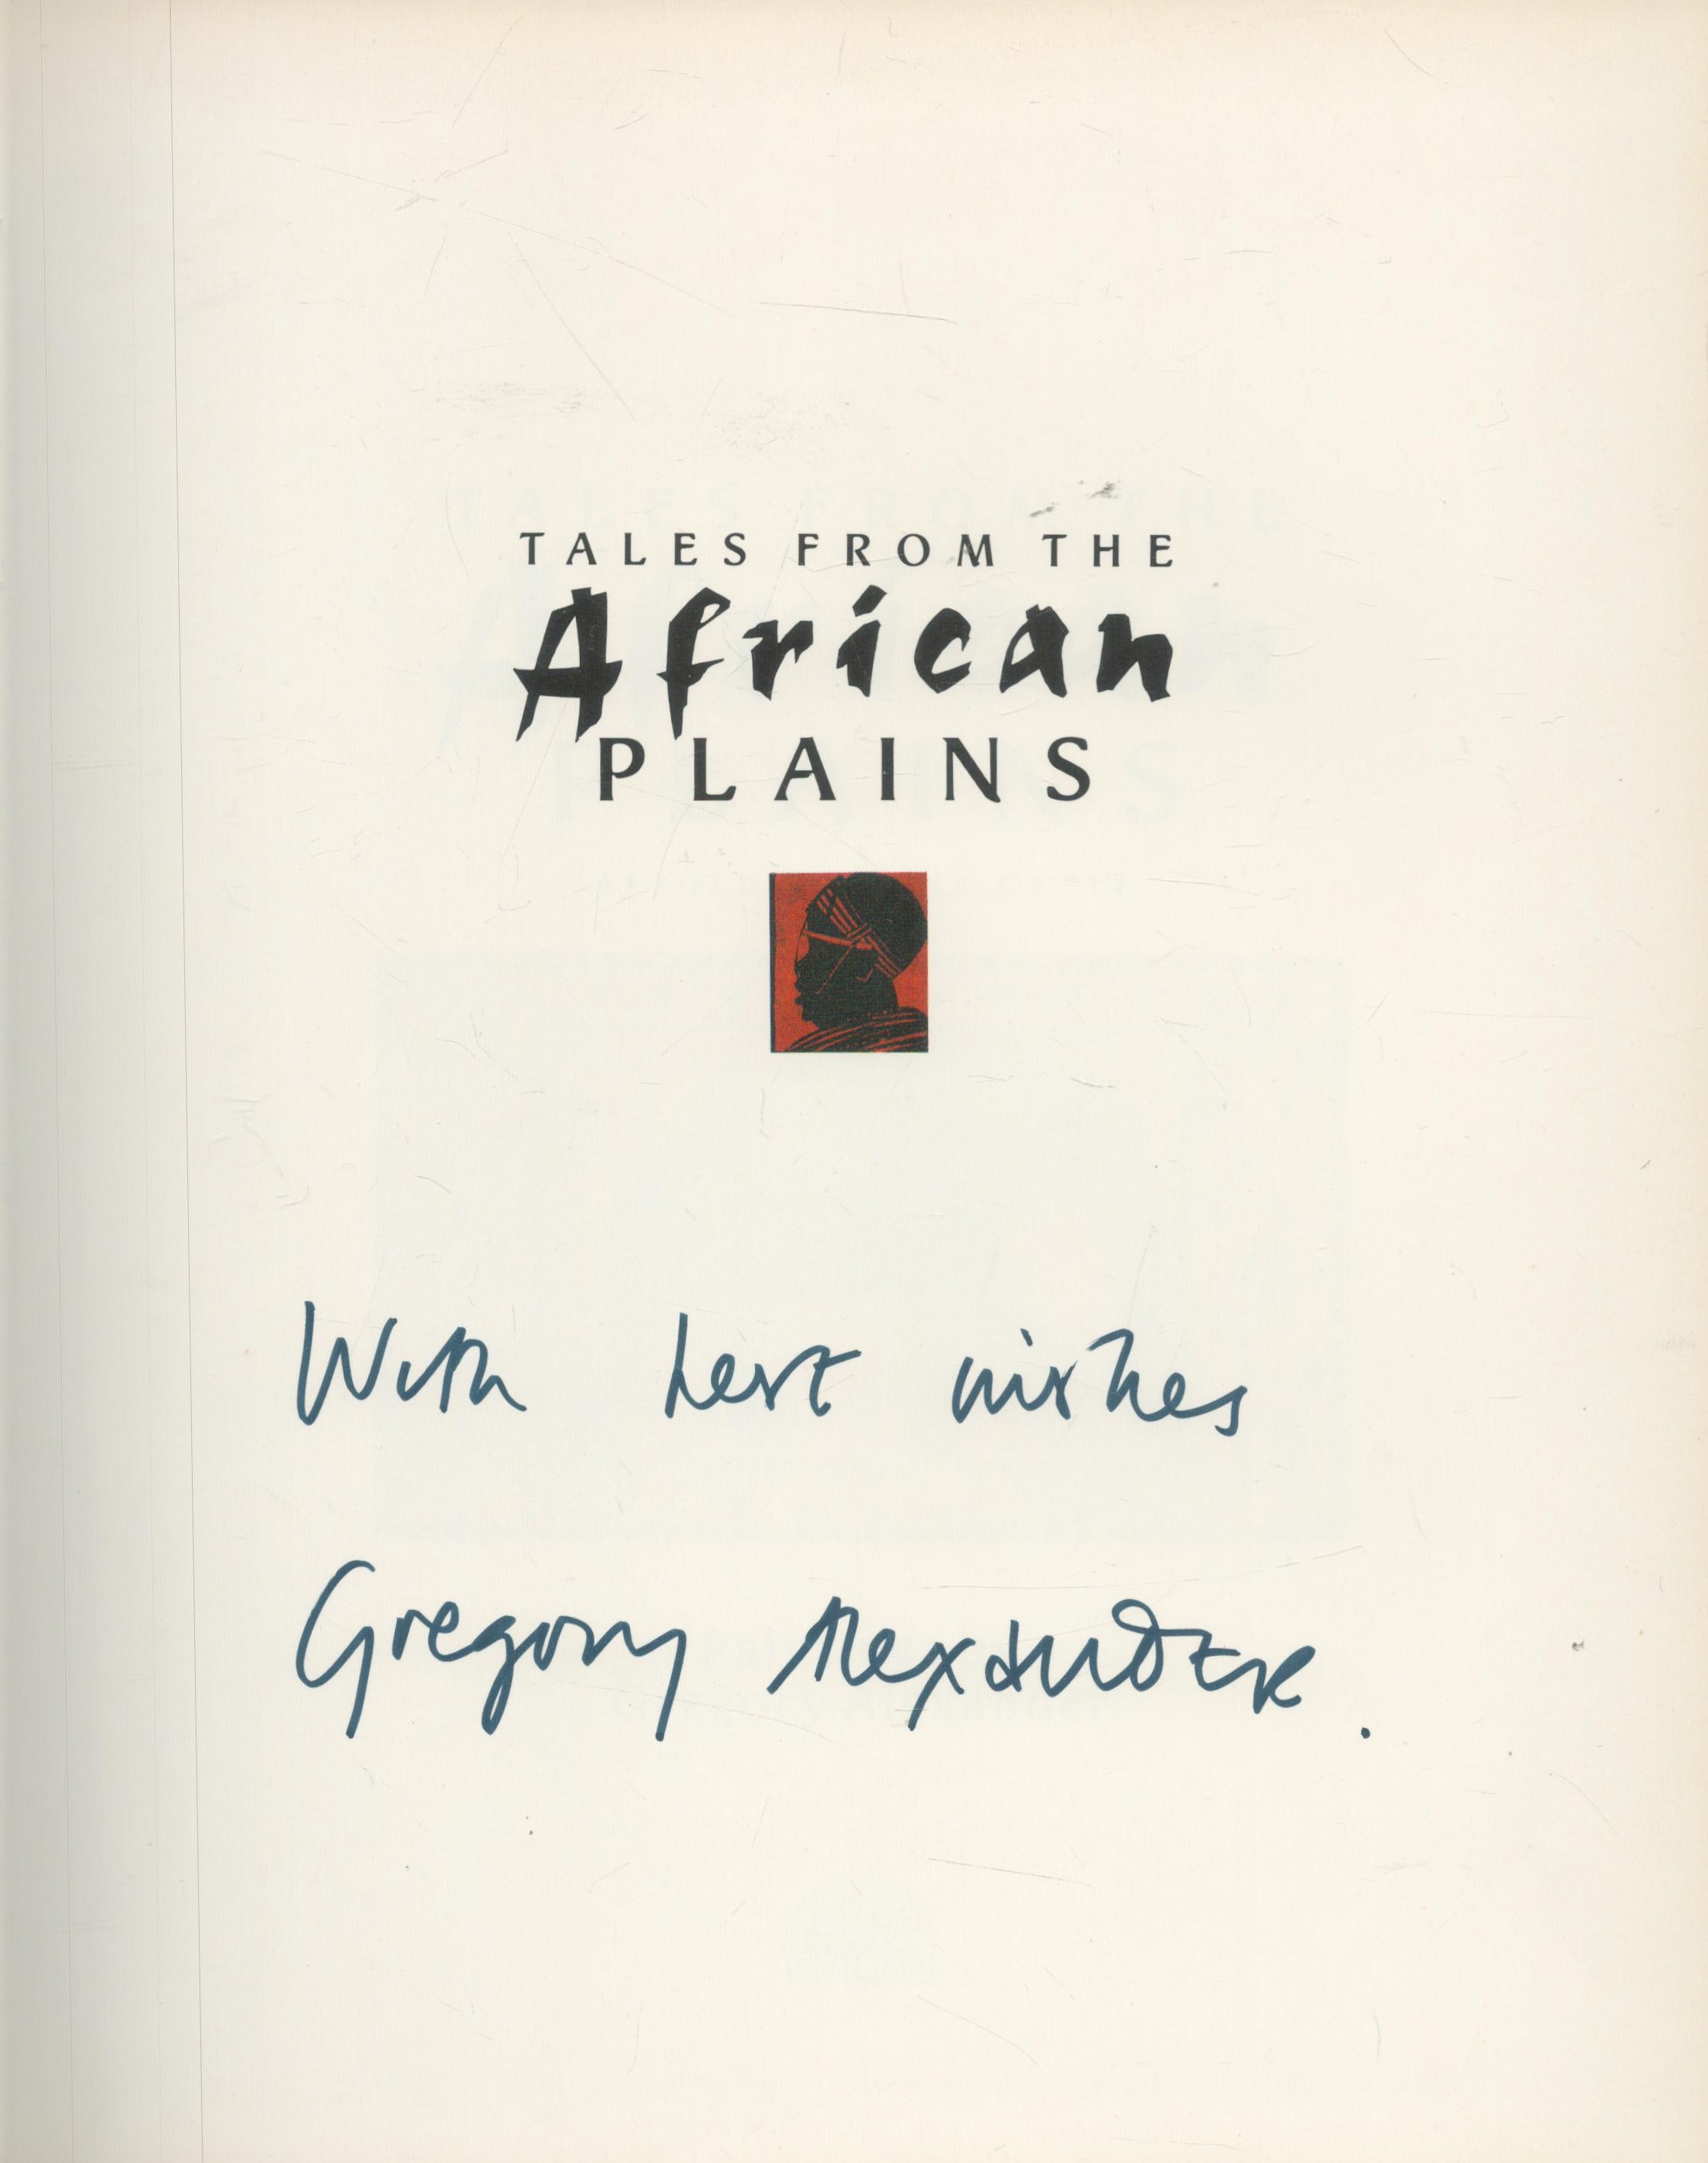 Tales From the African Plains by Anne Gatti signed by author, First American Edition hardback book - Image 2 of 3